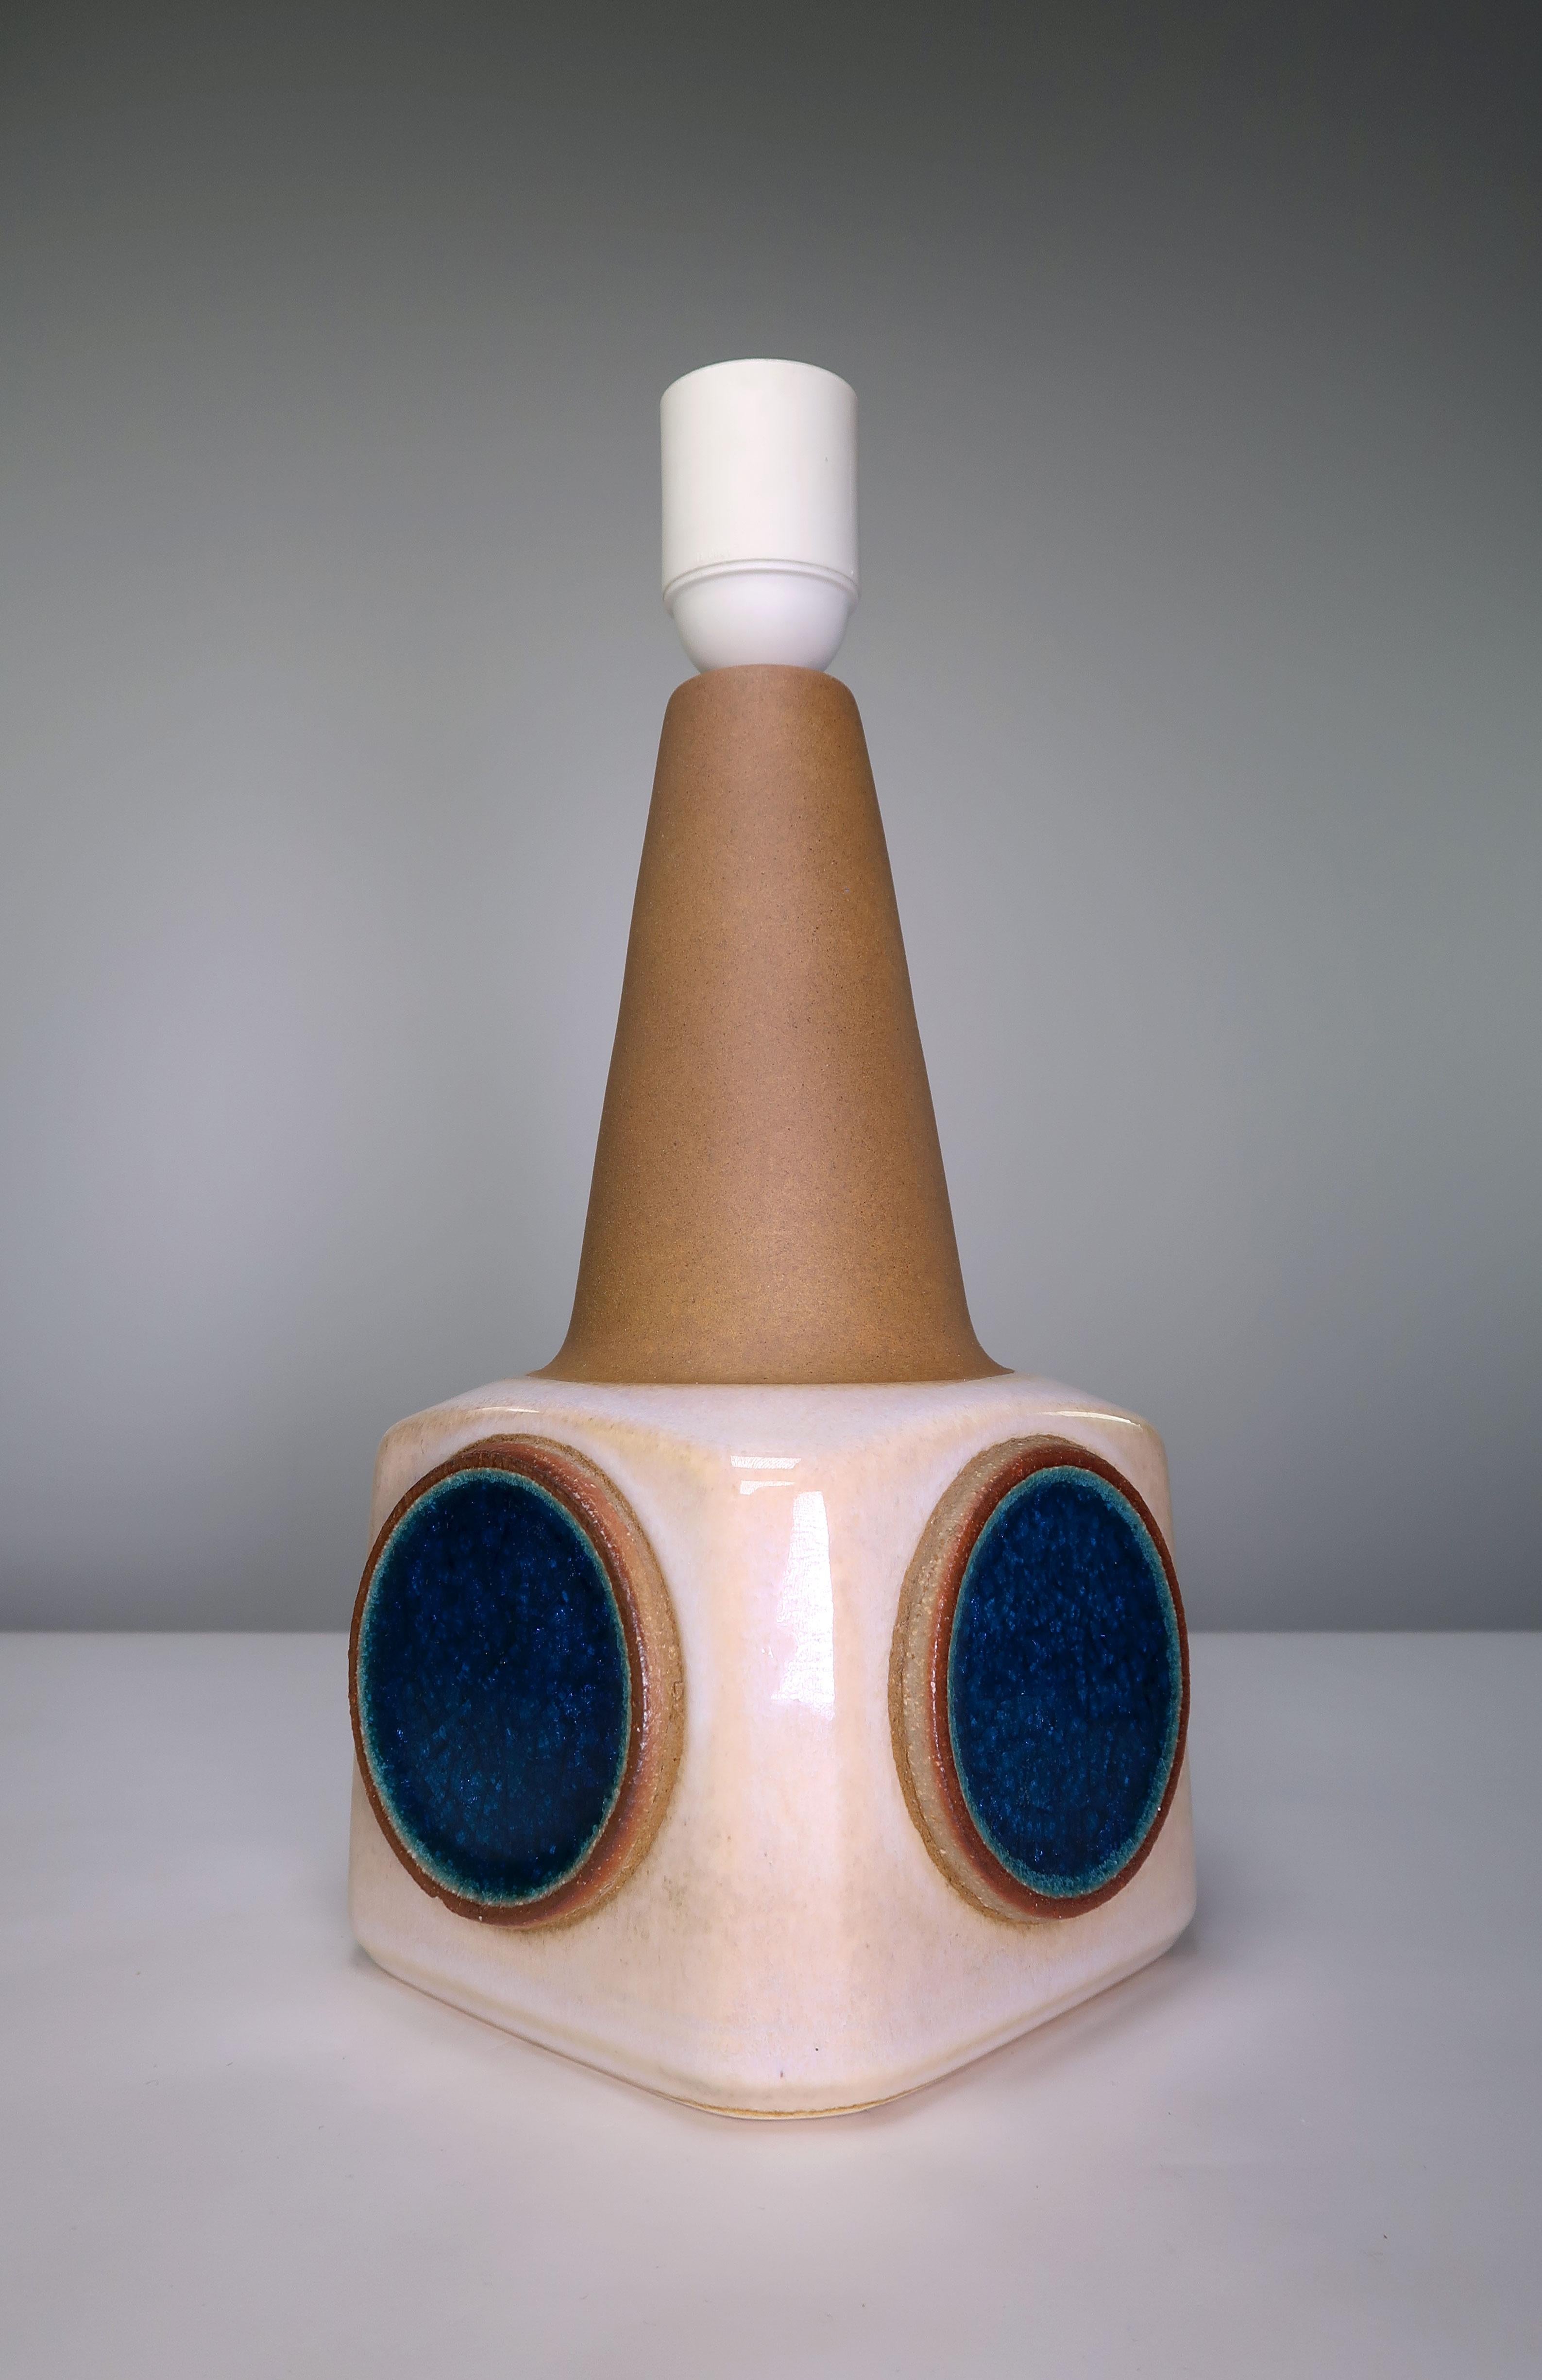 Mid-Century Modern Danish Modern Ceramic White with Blue Circles Table Lamp by Søholm, 1960s